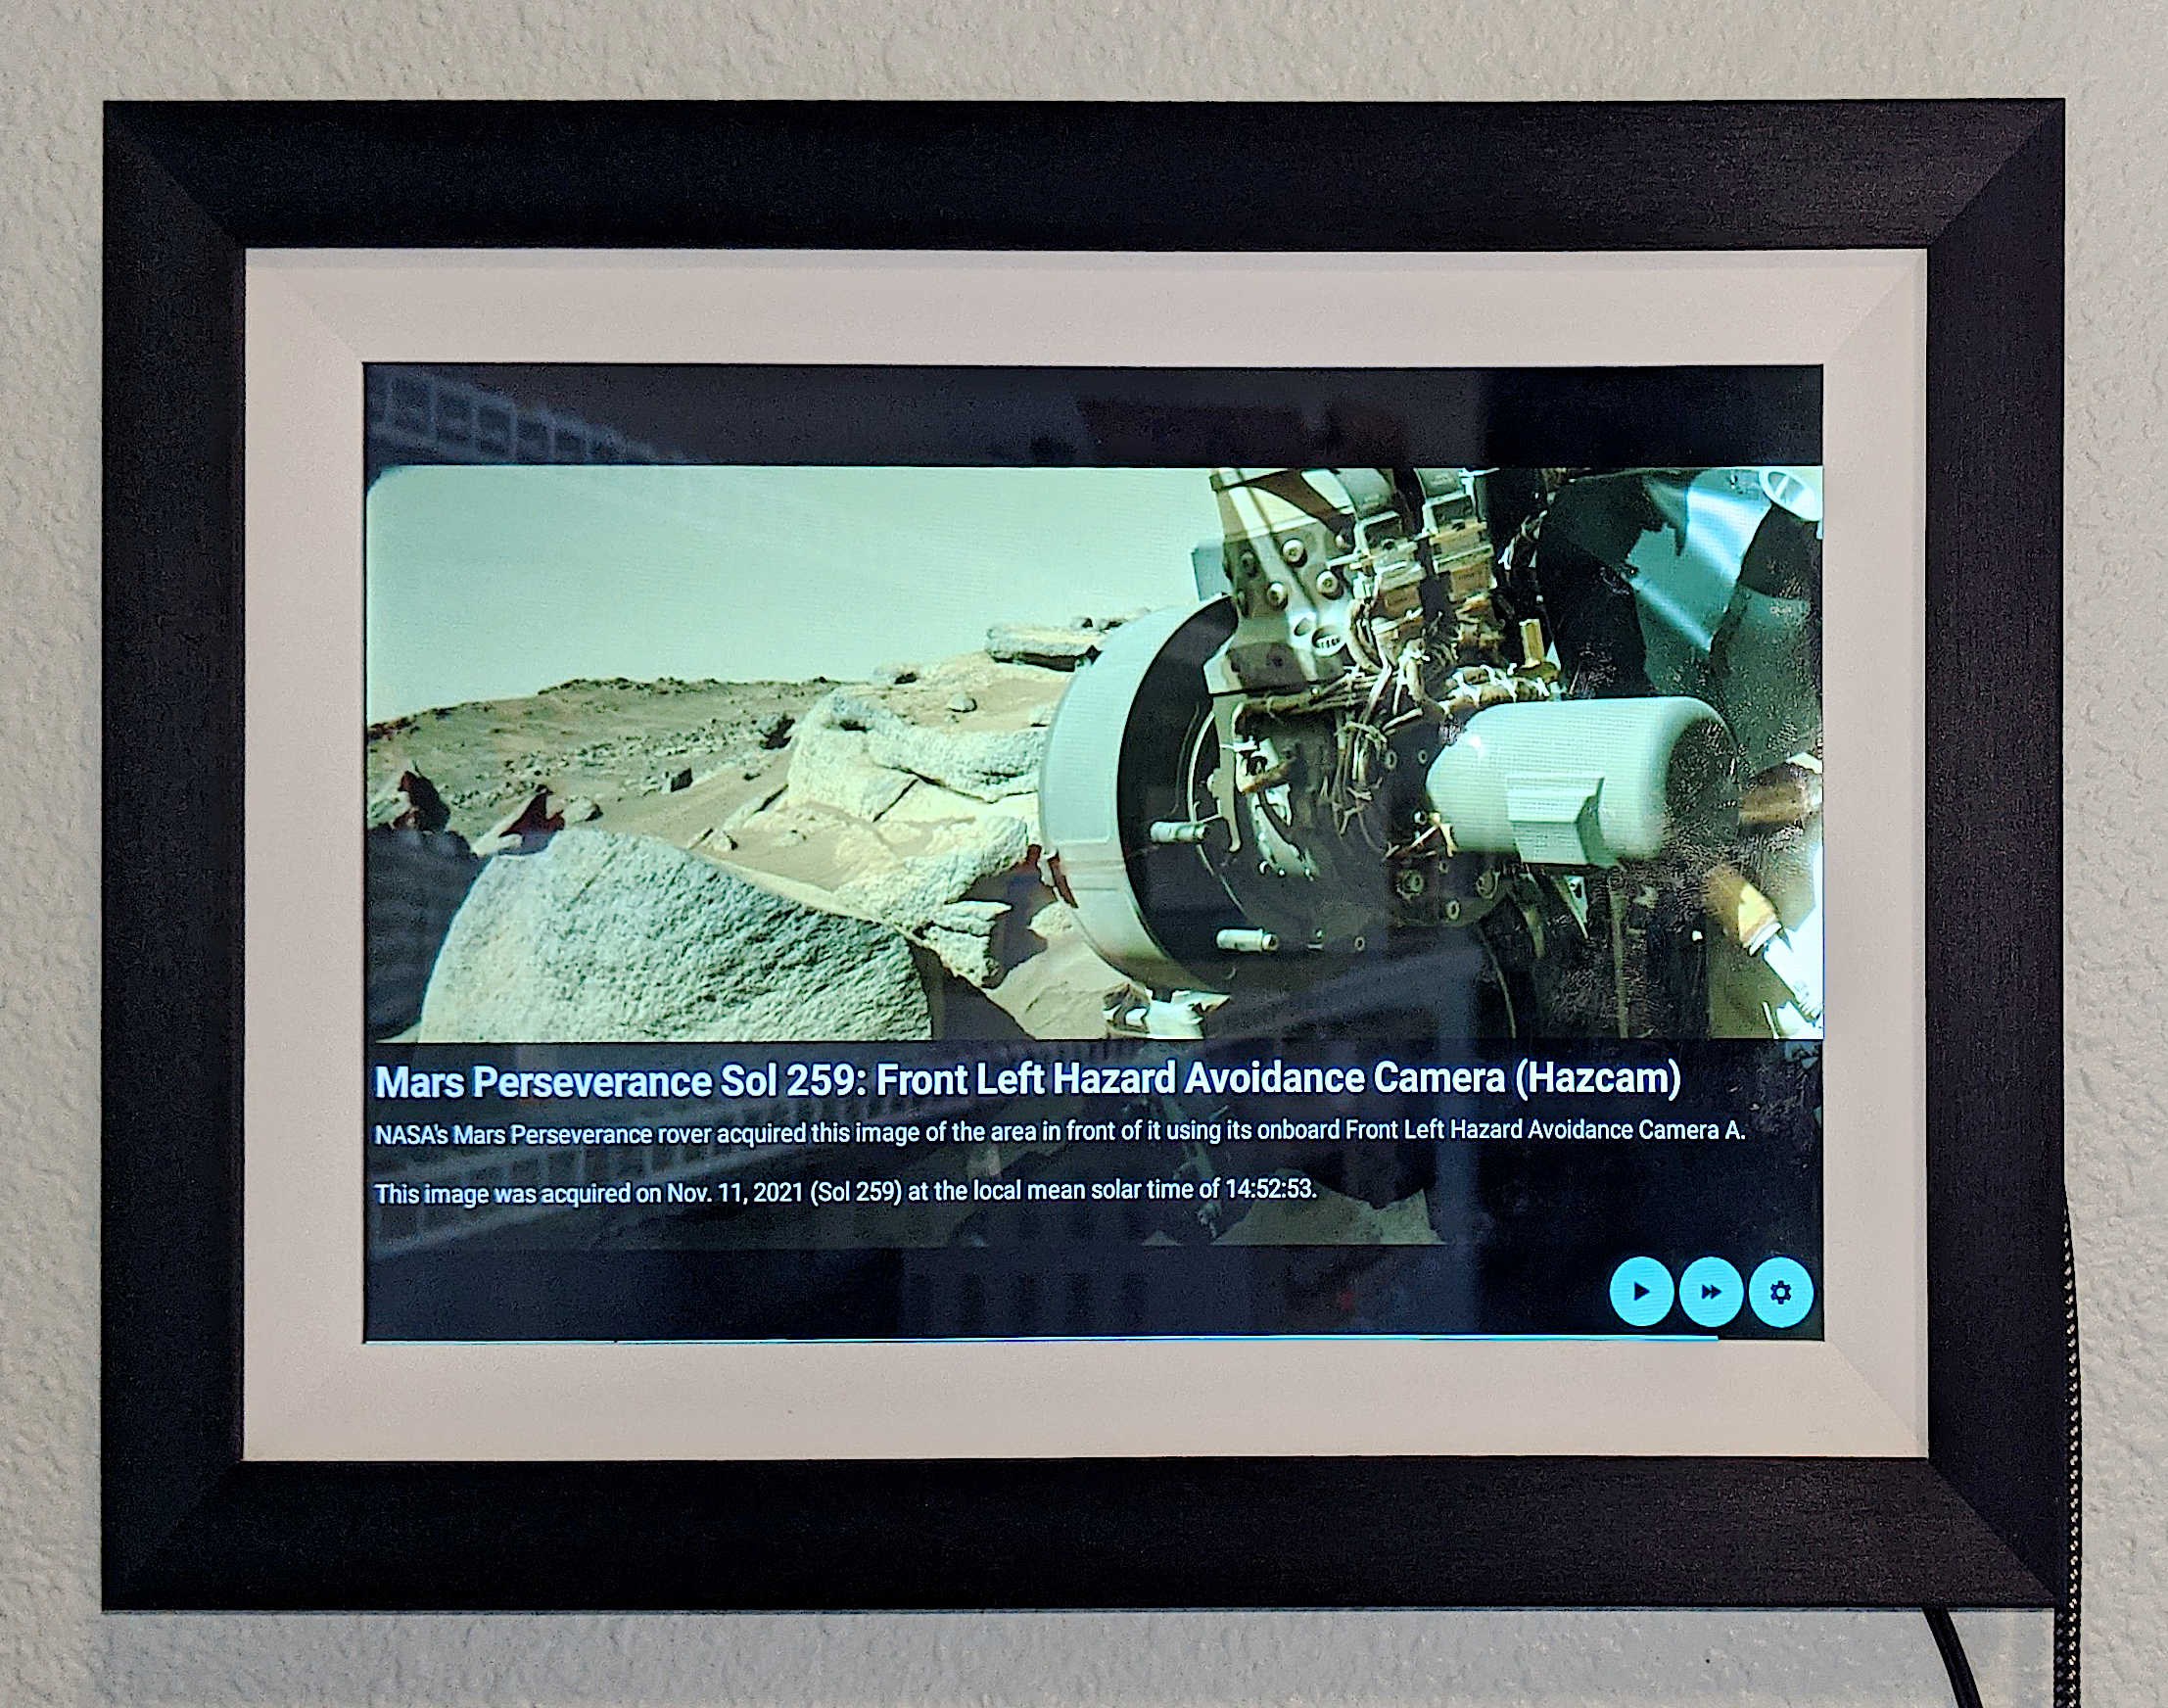 My custom Mars Photo Stream app running on the picture frame, displaying information overlay.